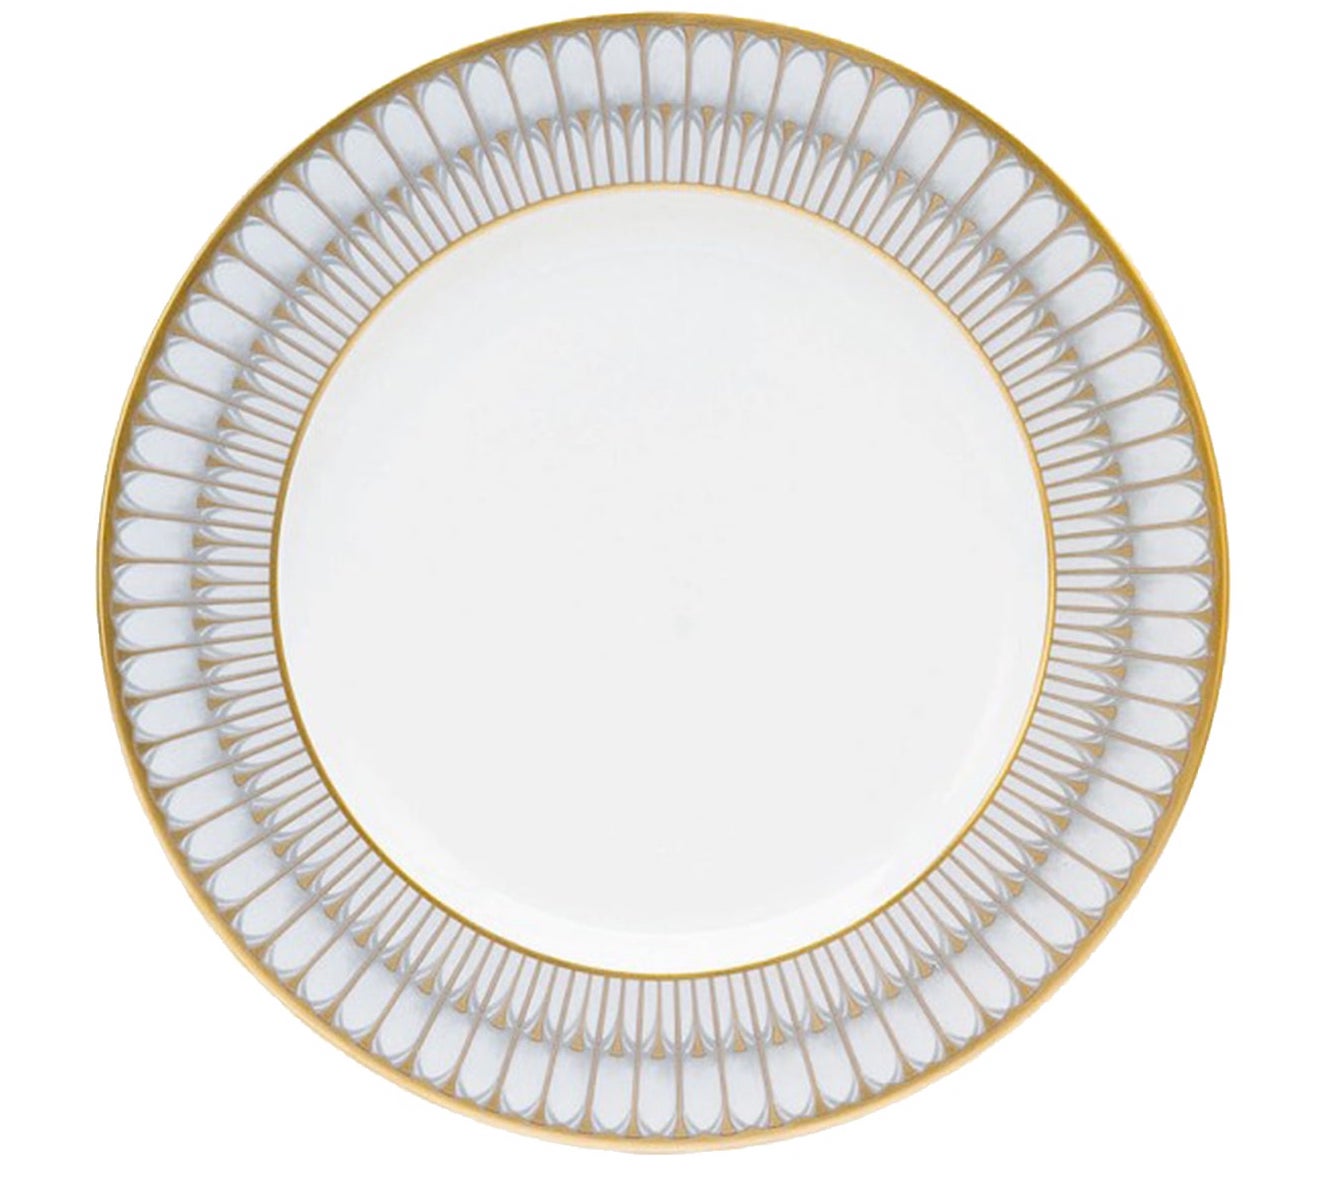 A white dinner plate with gold accents on the edge from Bering's Hardware in Houston.